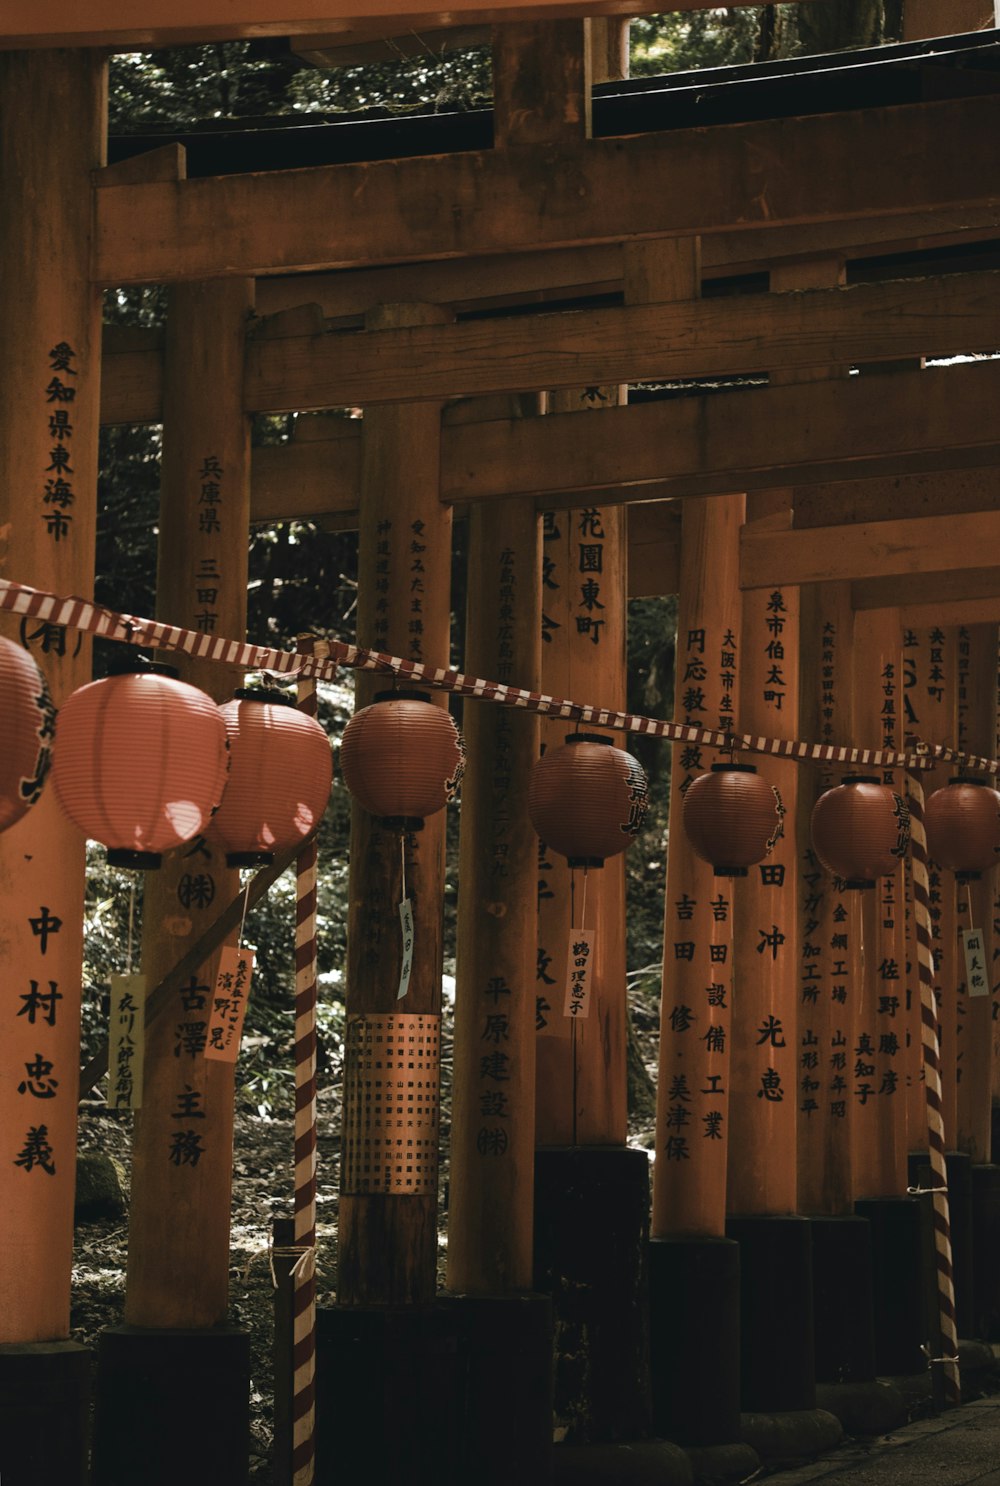 a group of wooden pillars with asian writing on them